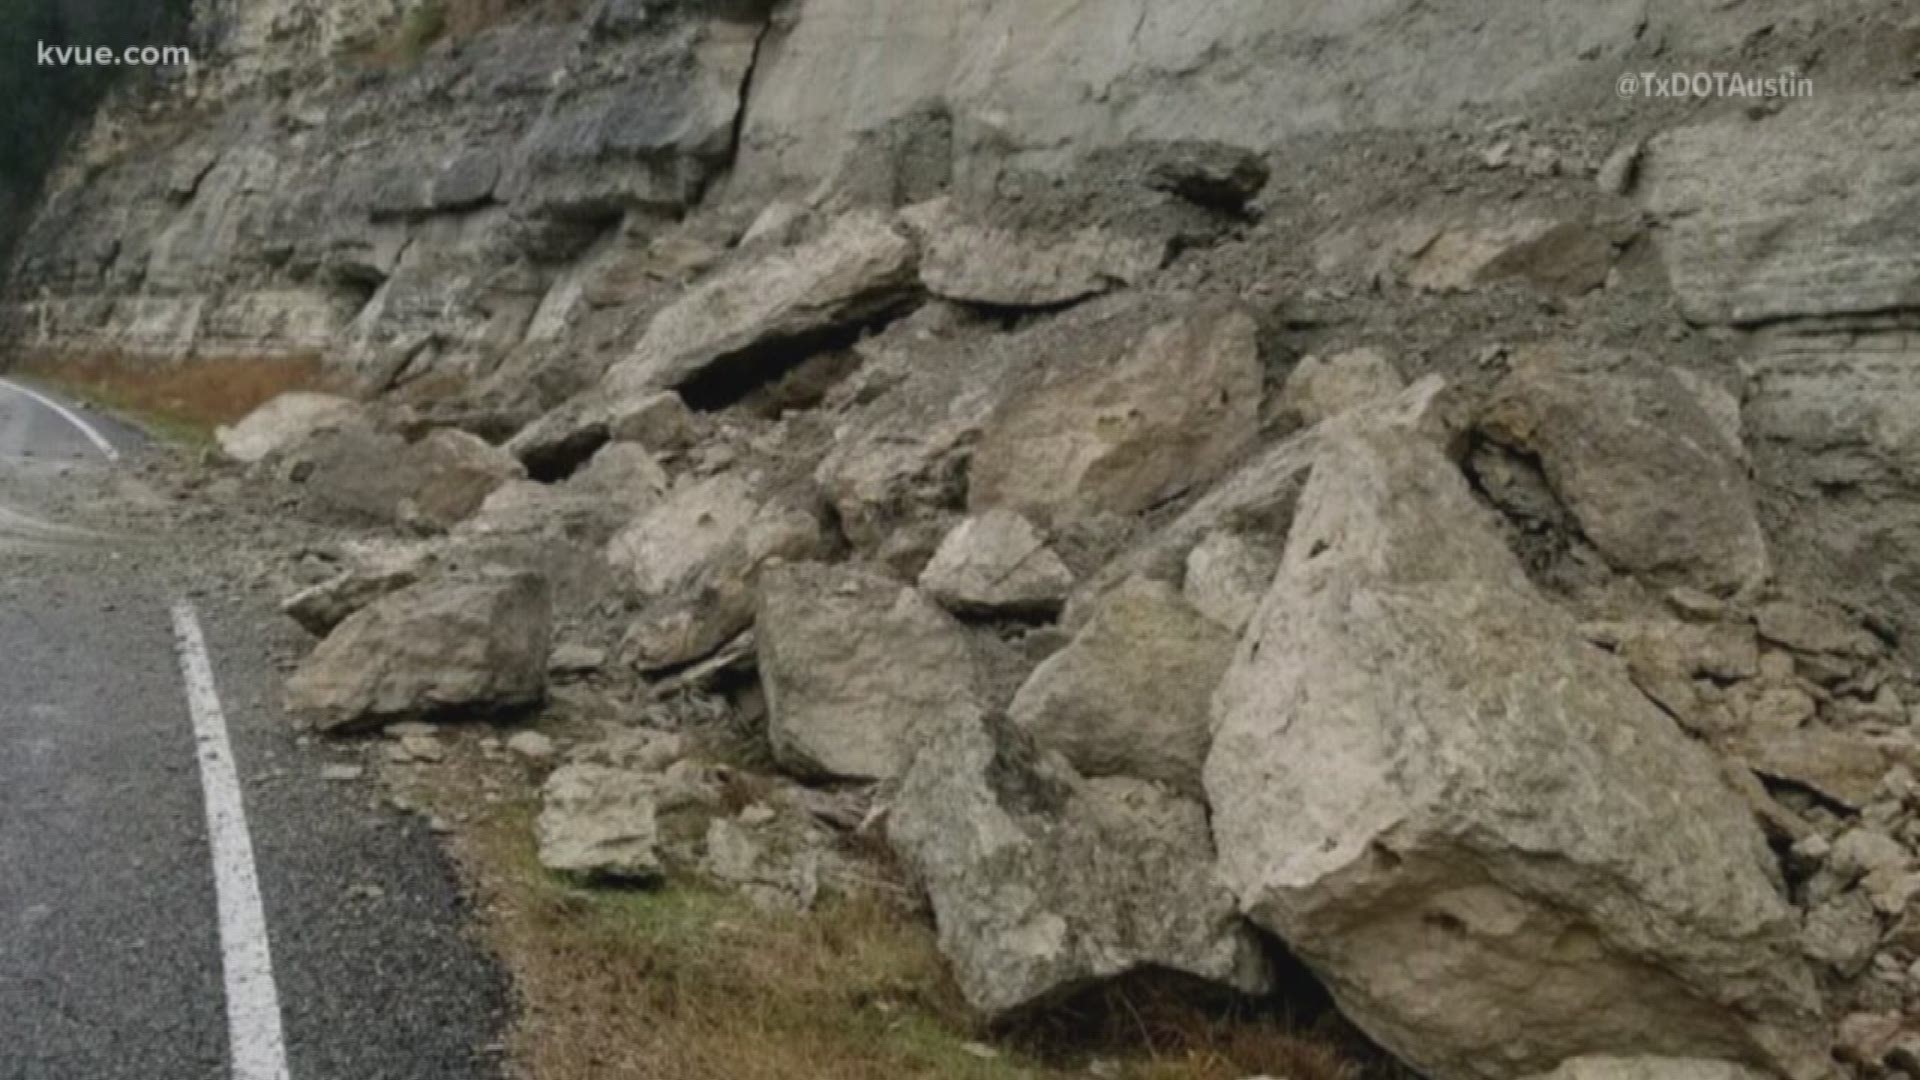 A small rockslide left debris out on one lane of 2222.